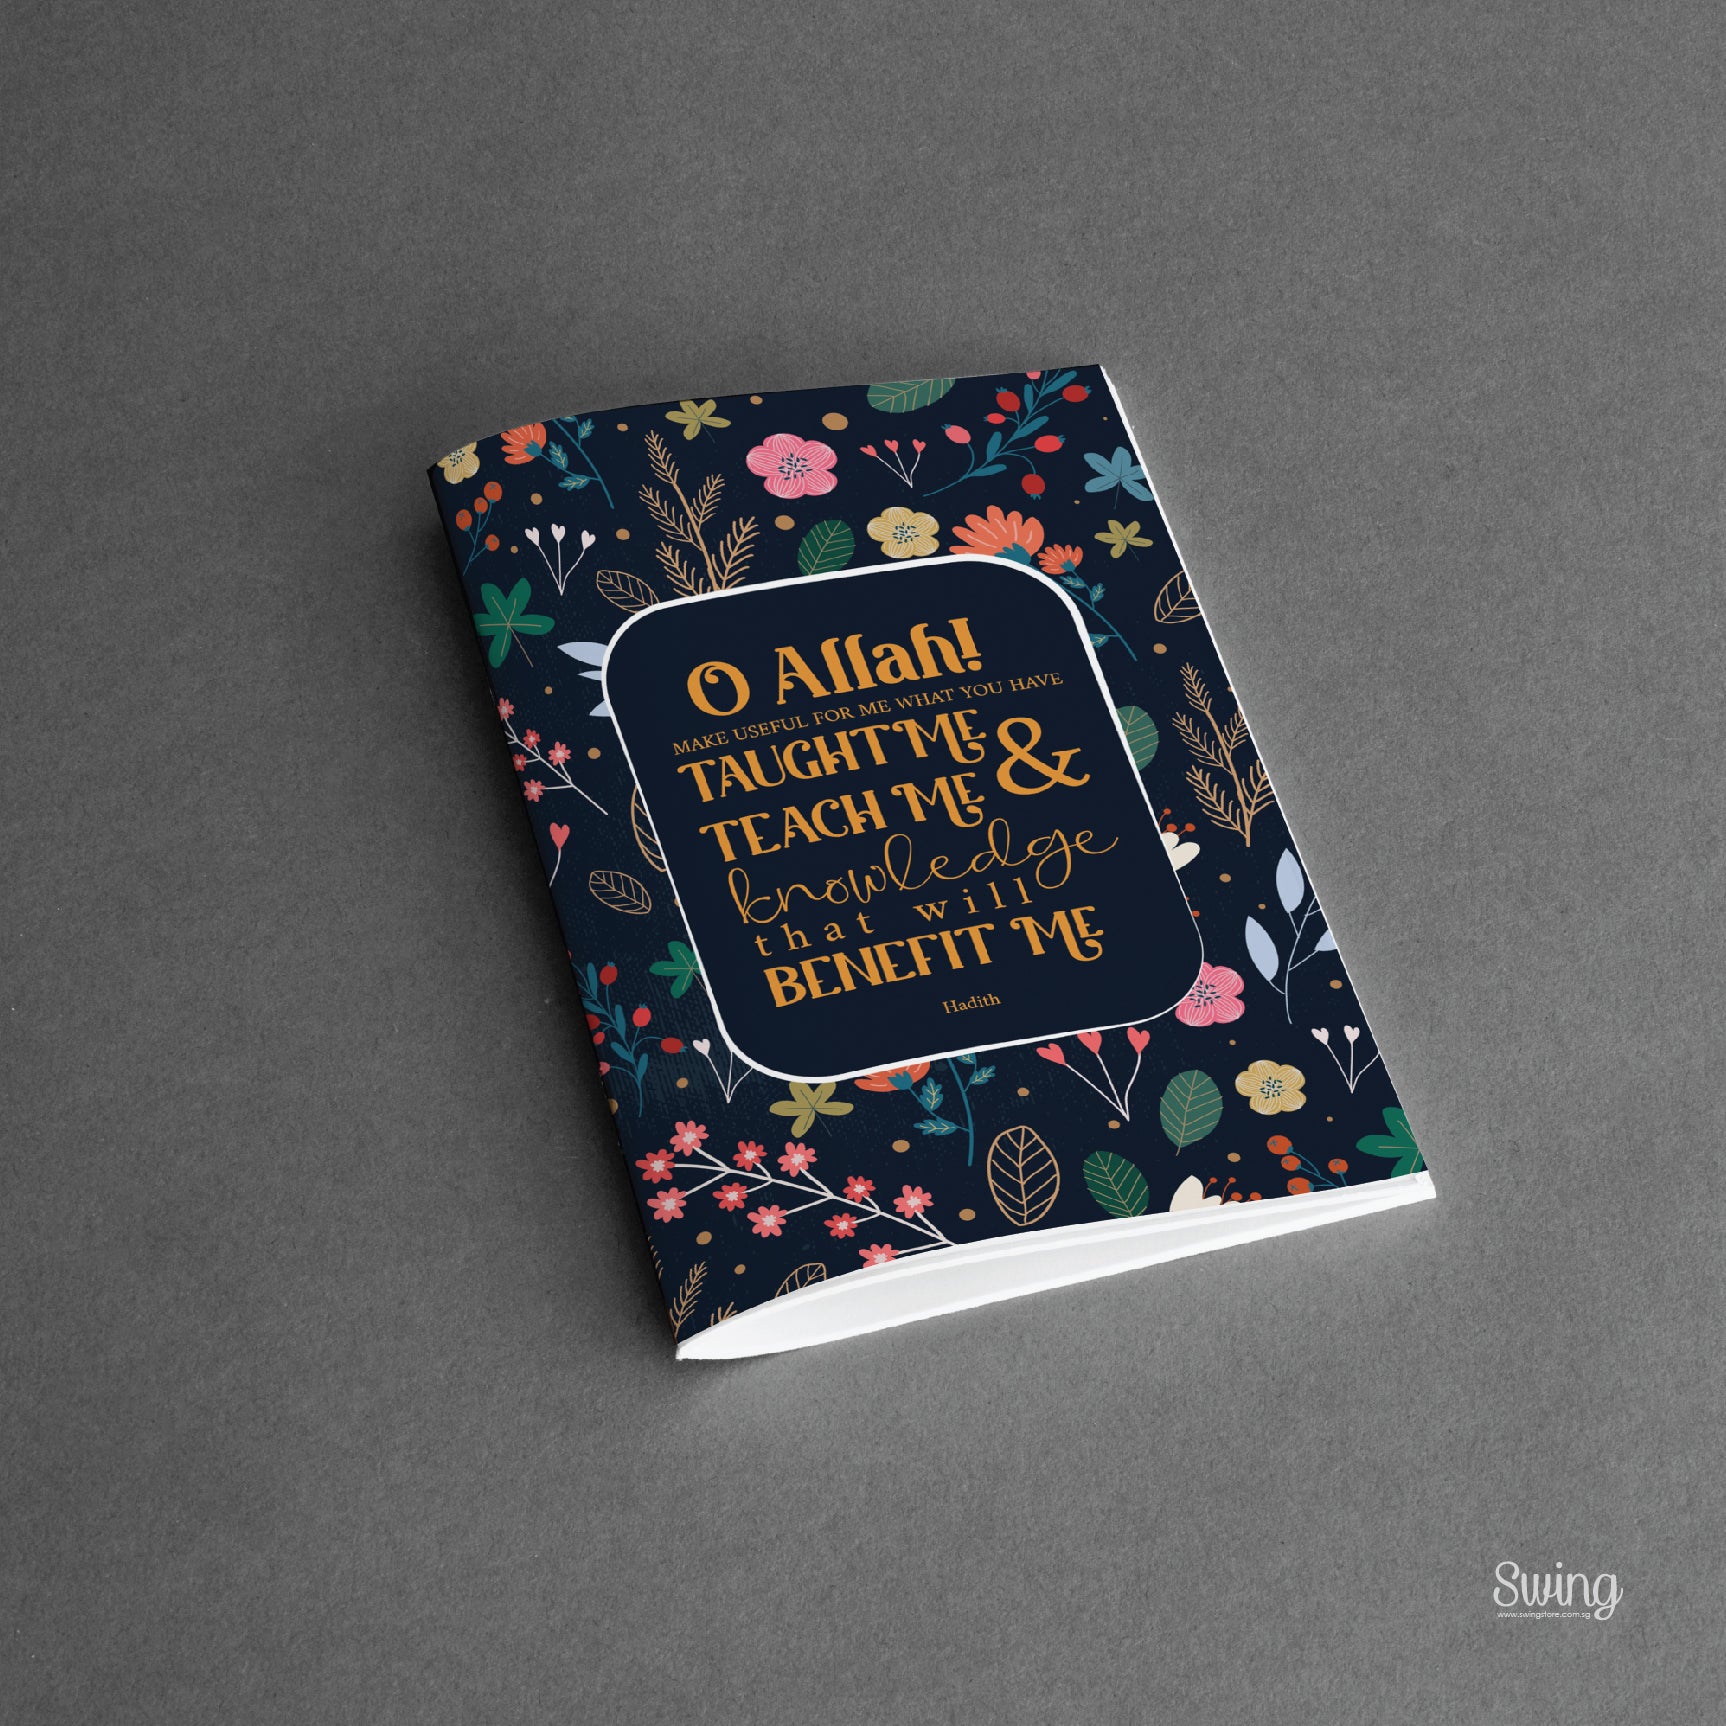 Islamic Notebook Taught and Teach Me